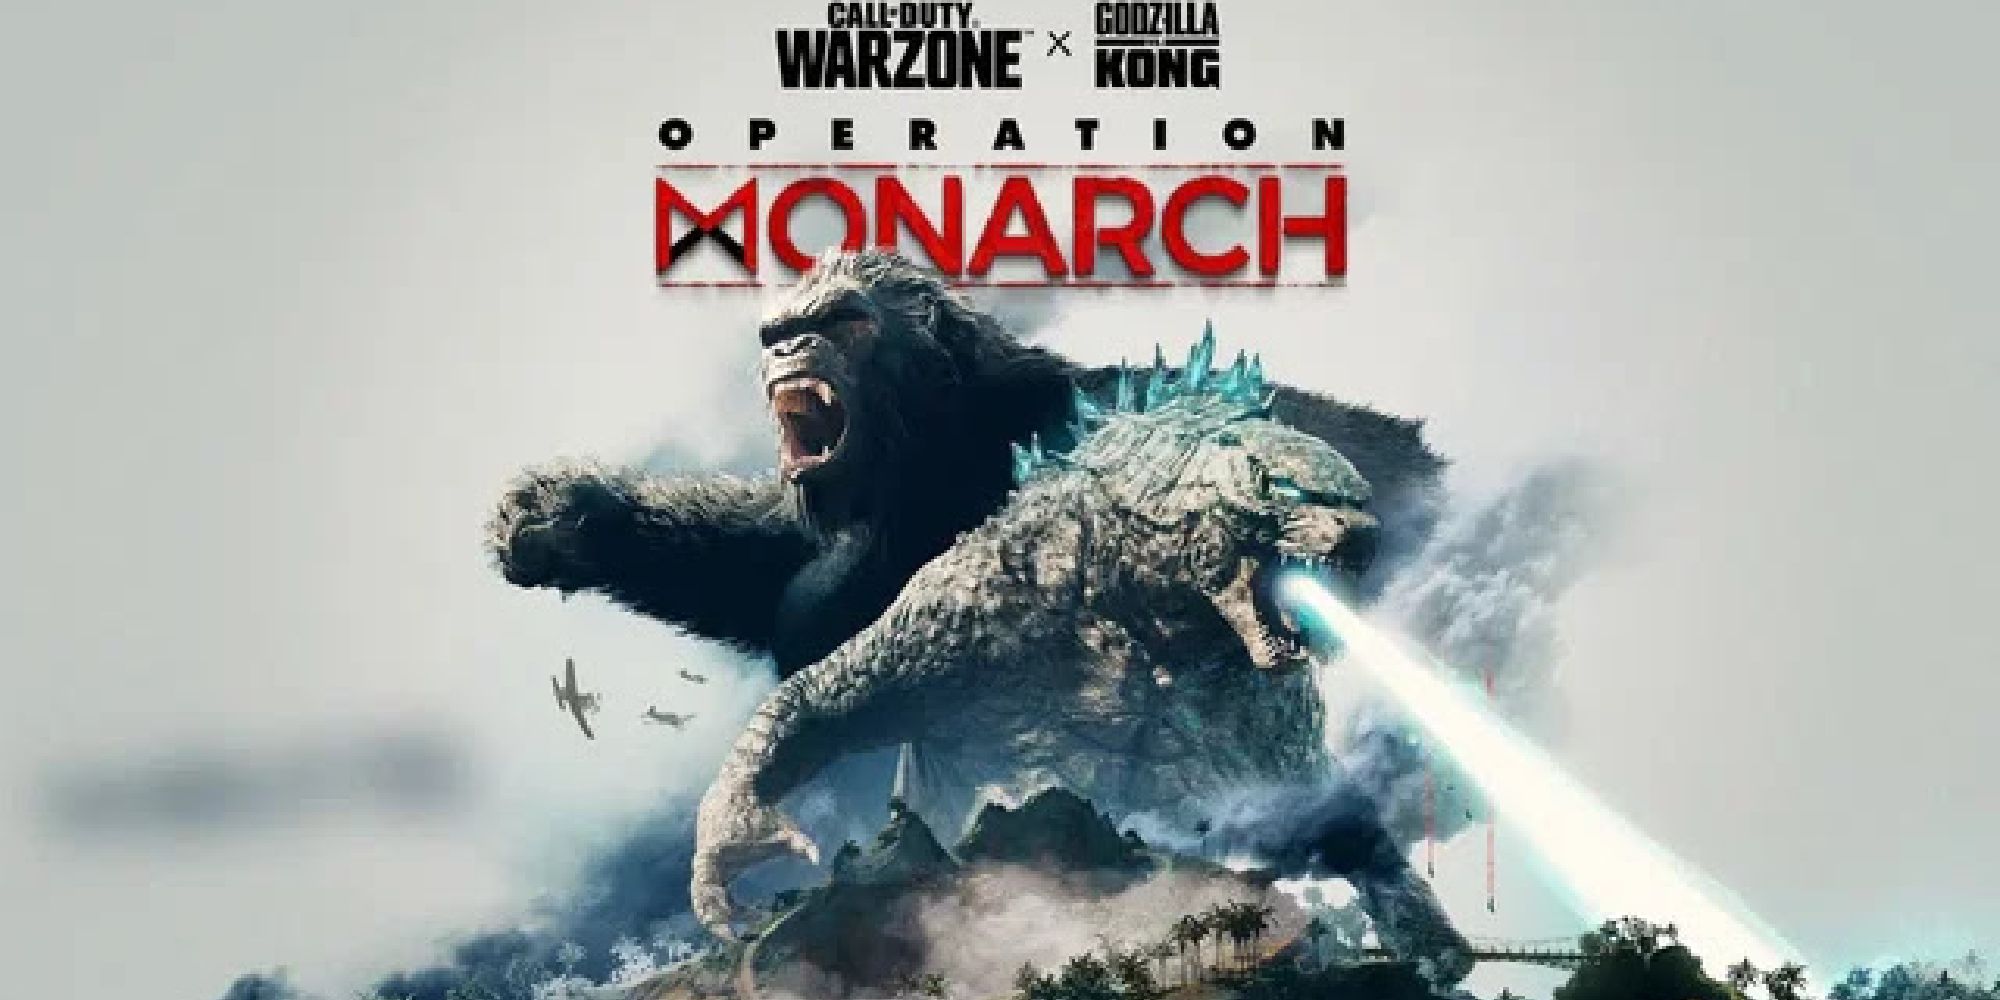 A poster for Operation Monarch showing King Kong and Godzilla 